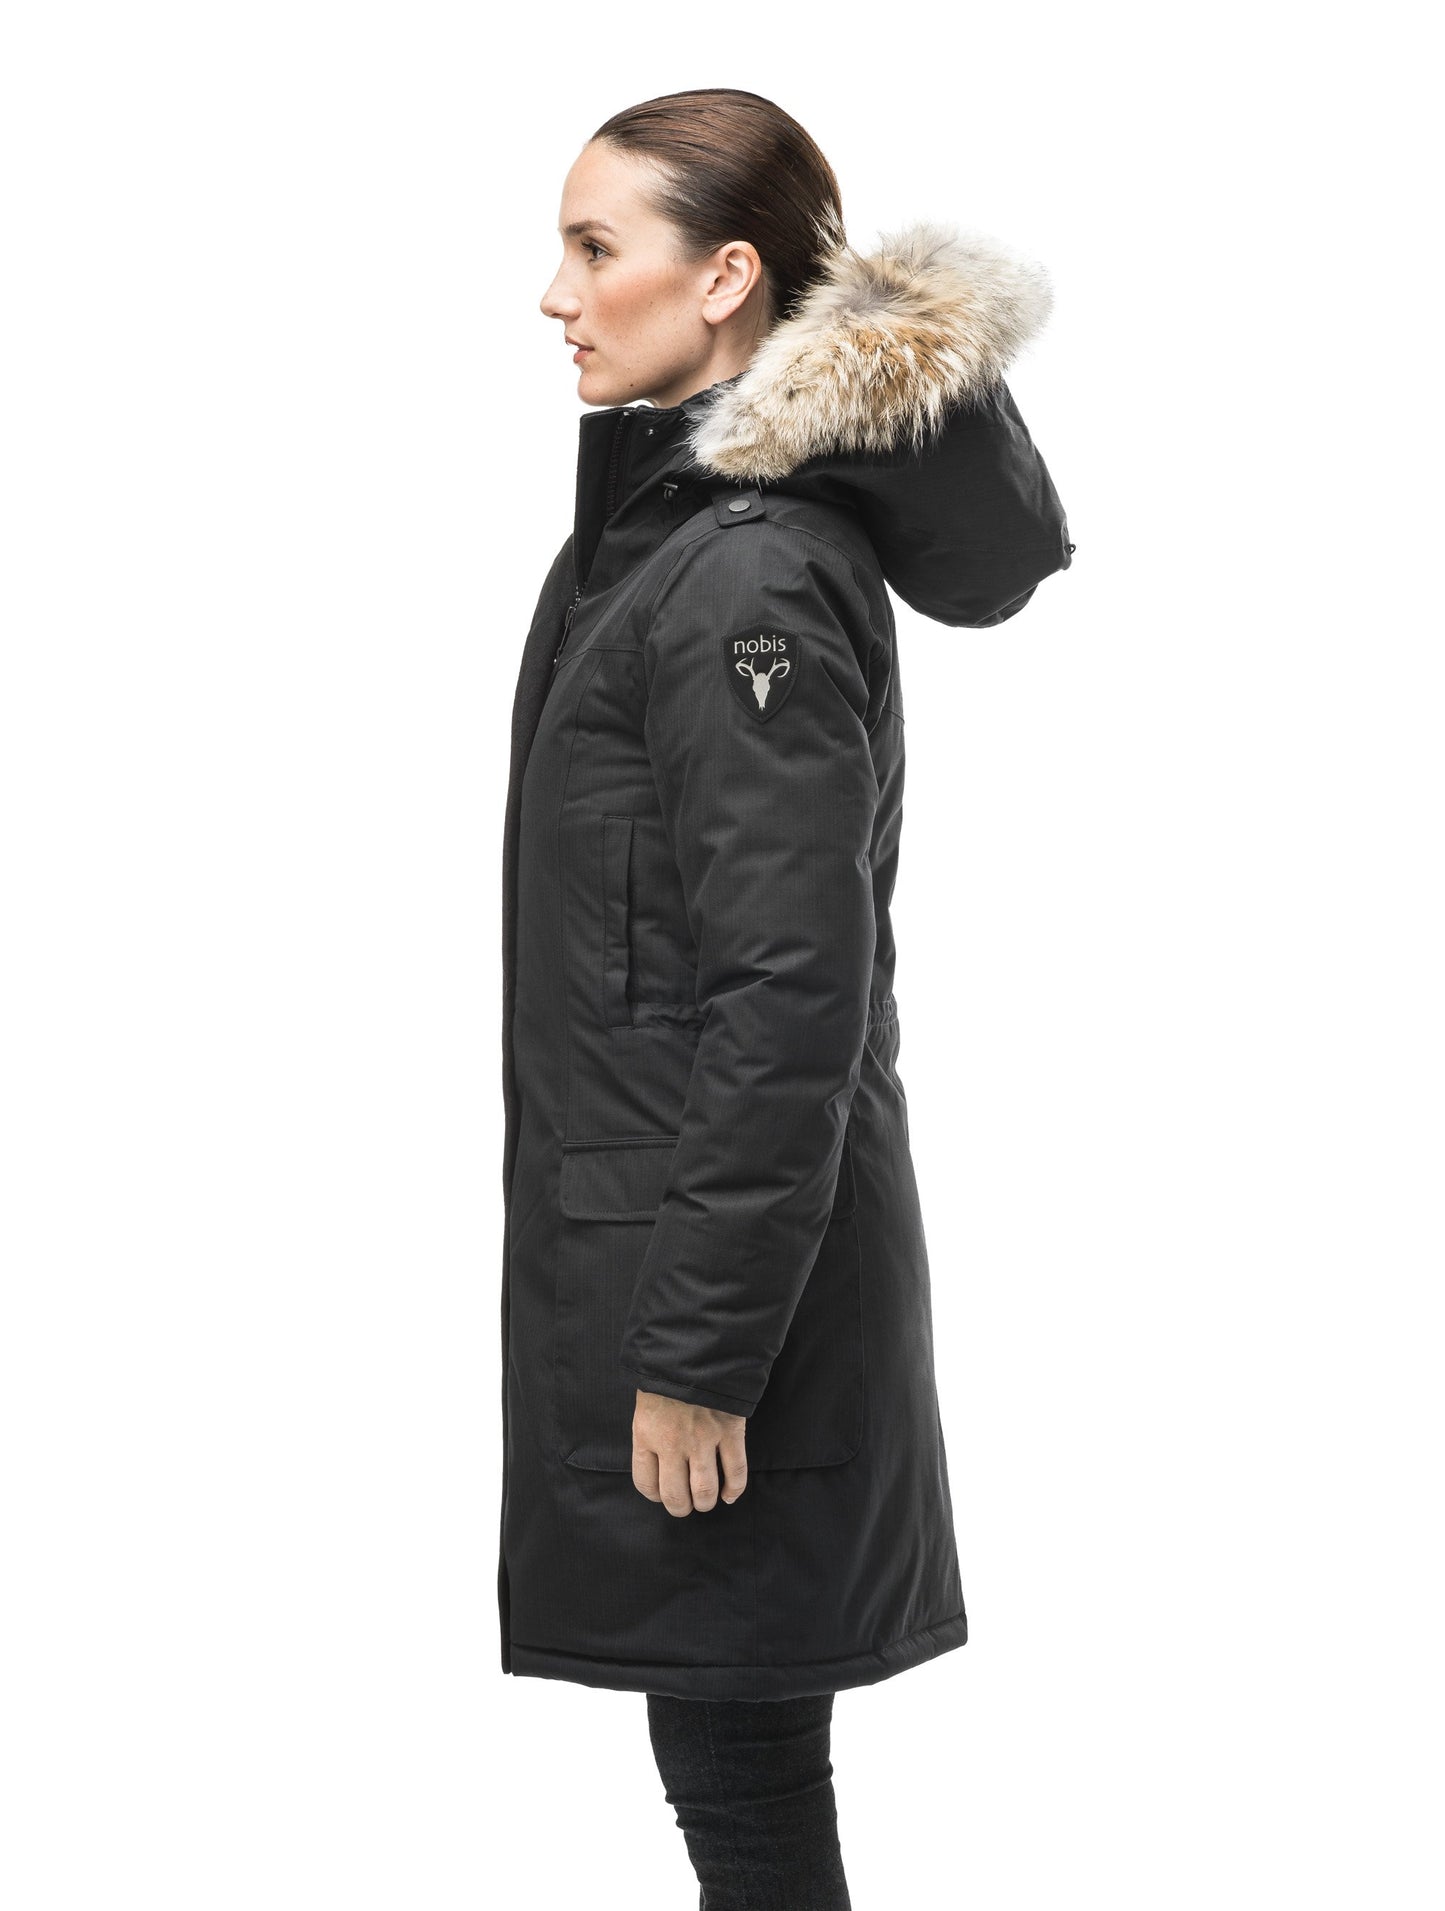 Women's knee length down filled parka with fur trim hood in CH Black